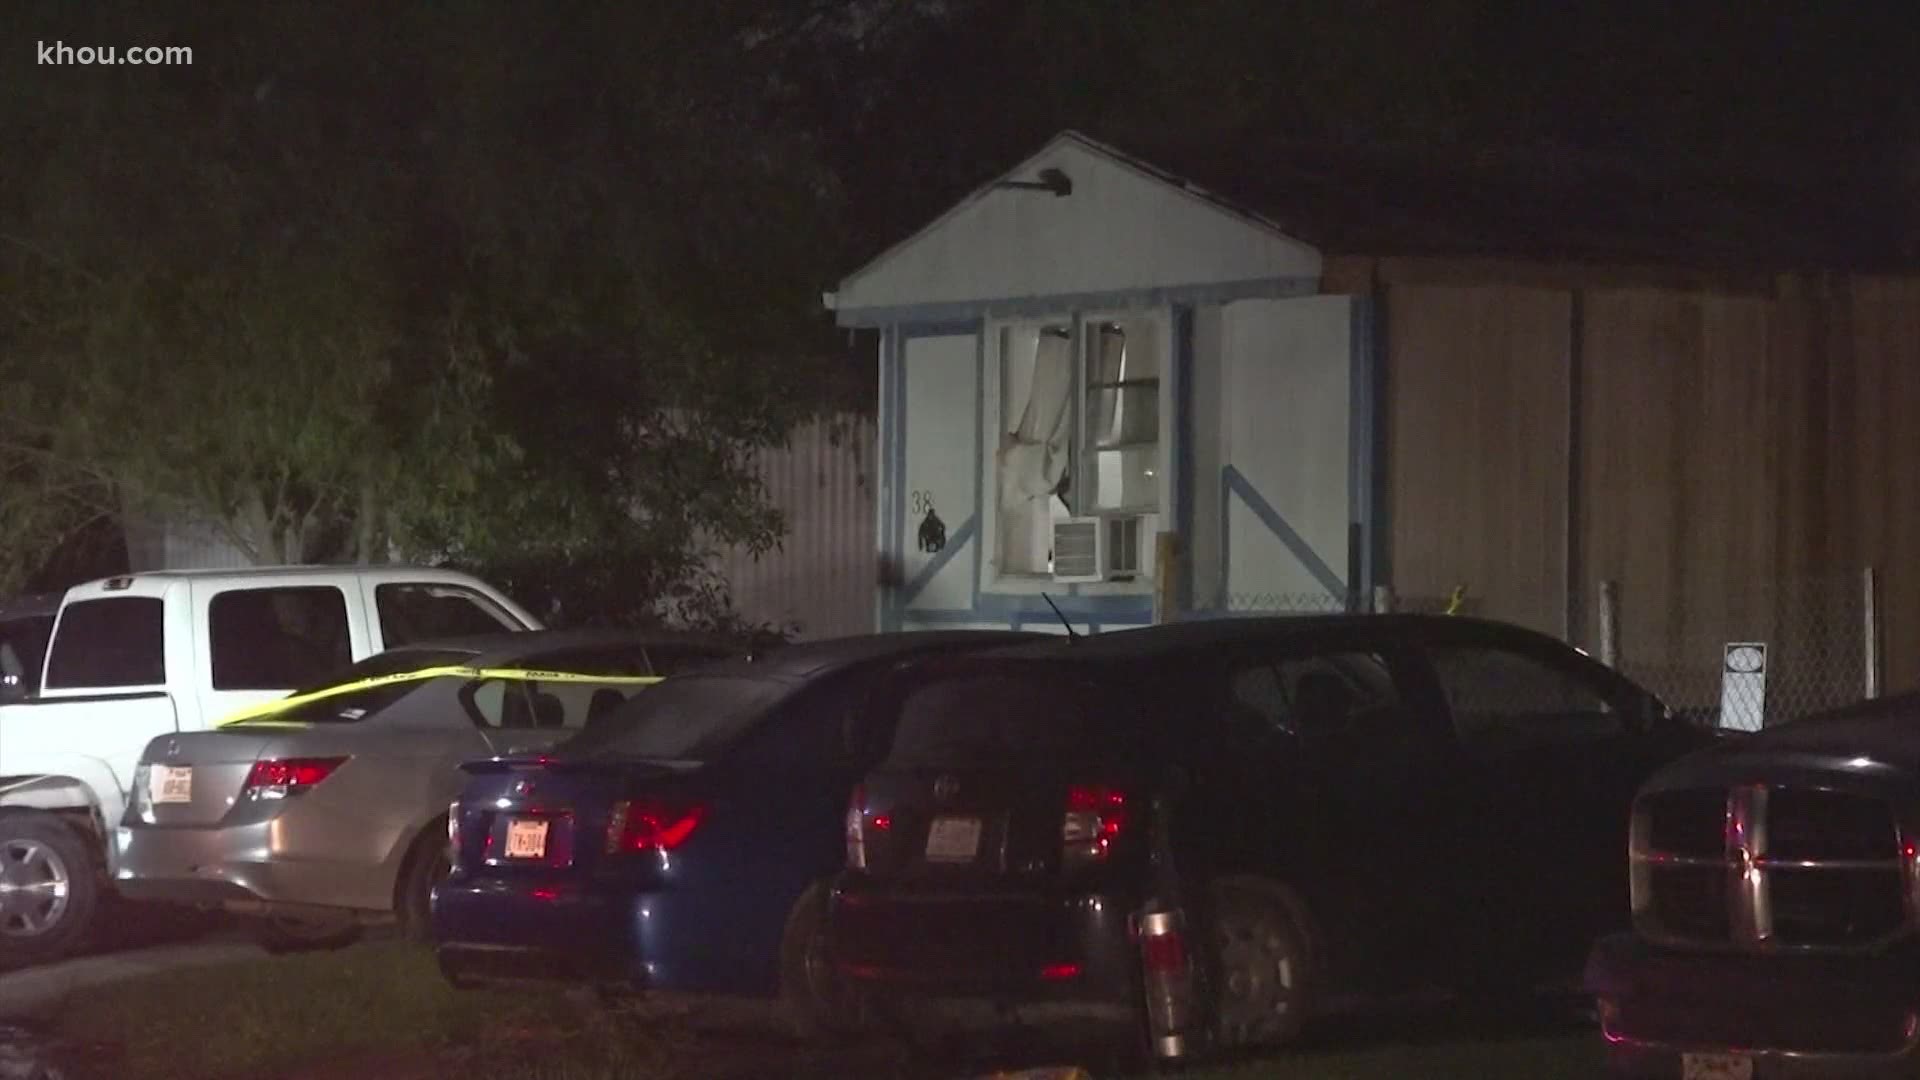 Two teenage brothers were found hiding under a trailer after a scary, violent home invasion in northwest Harris County overnight.